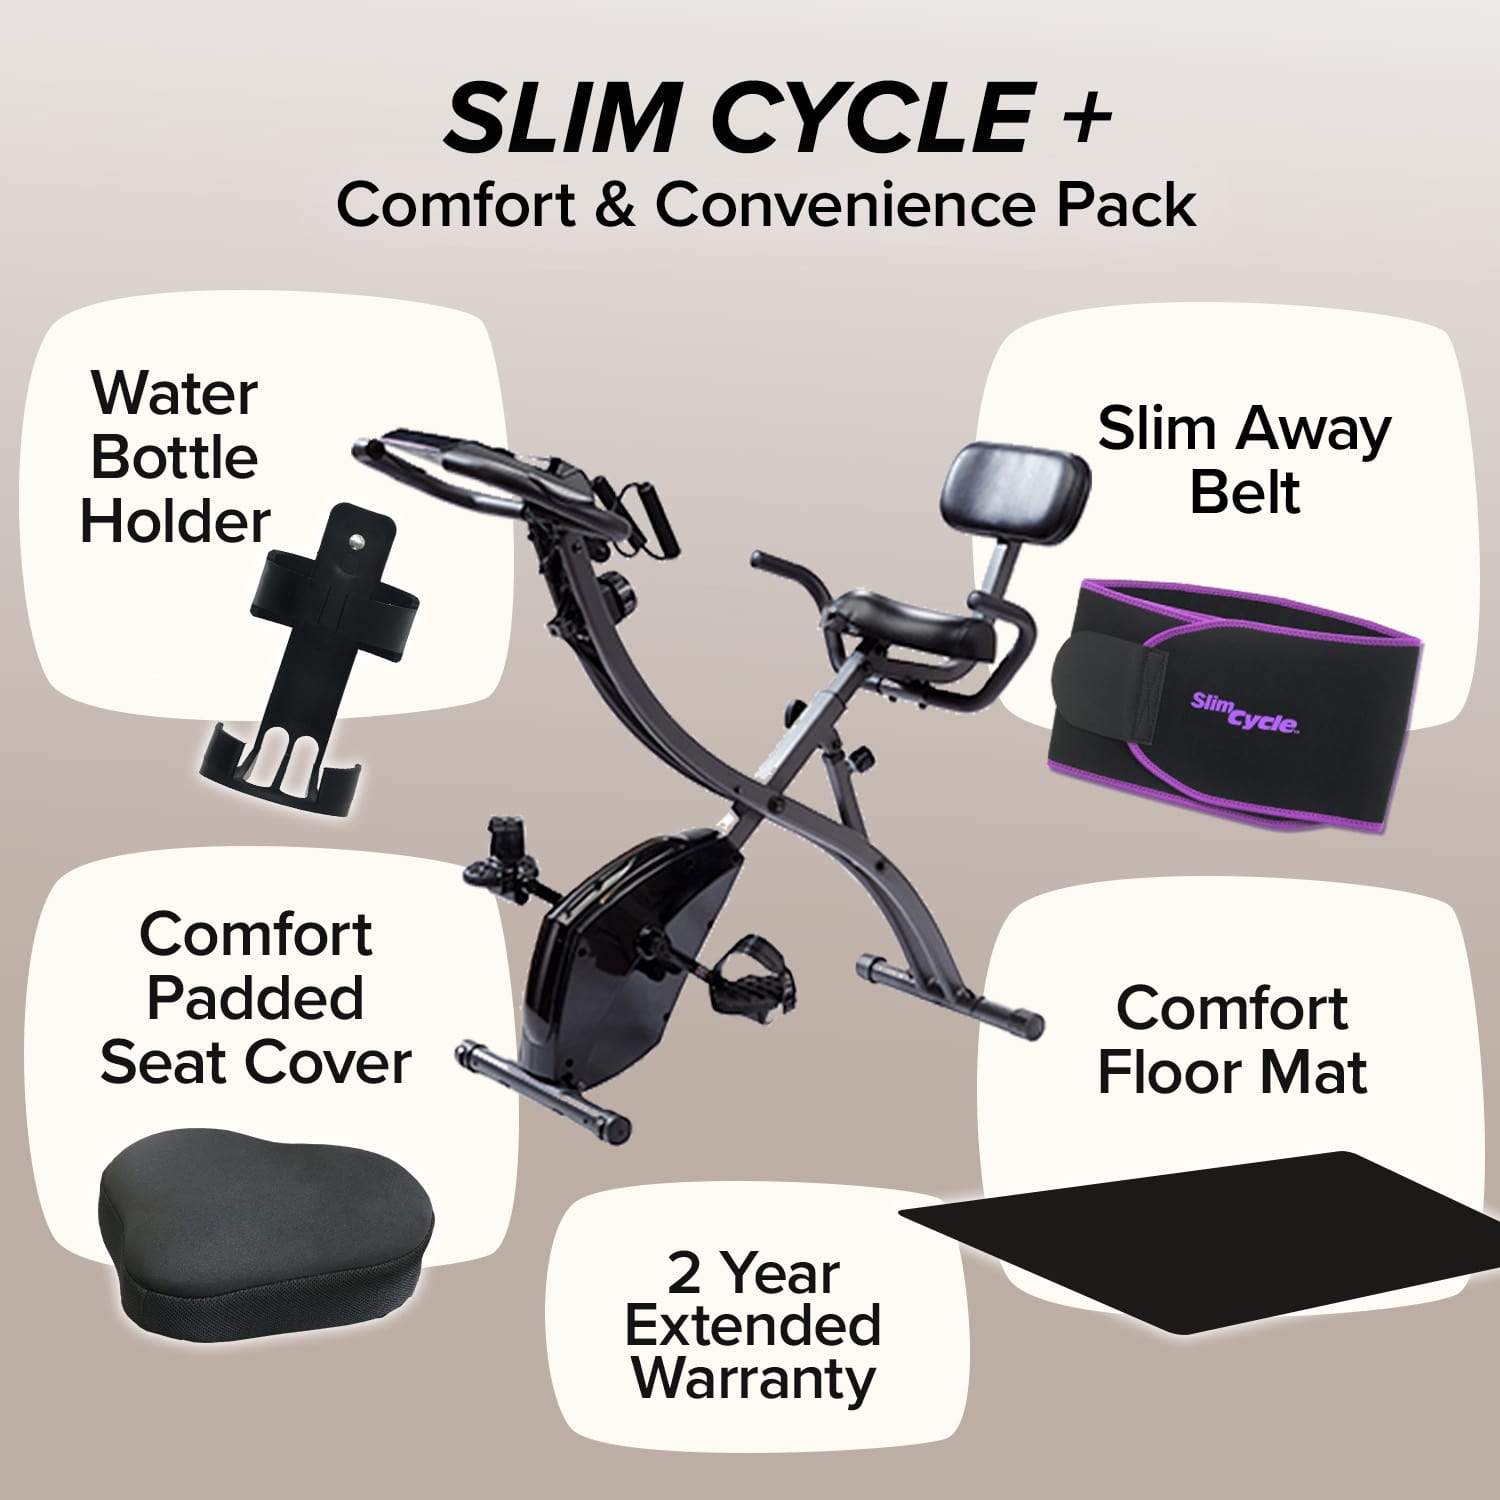 Images of a Slim Cycle, Water Bottle Holder, Padded Seat Cover, Slim Away Belt, and Comfort Floor Mat on tan background. Text says "Slim Cycle + Comfort & Convenience Pack, 2 Year Extended Warranty"